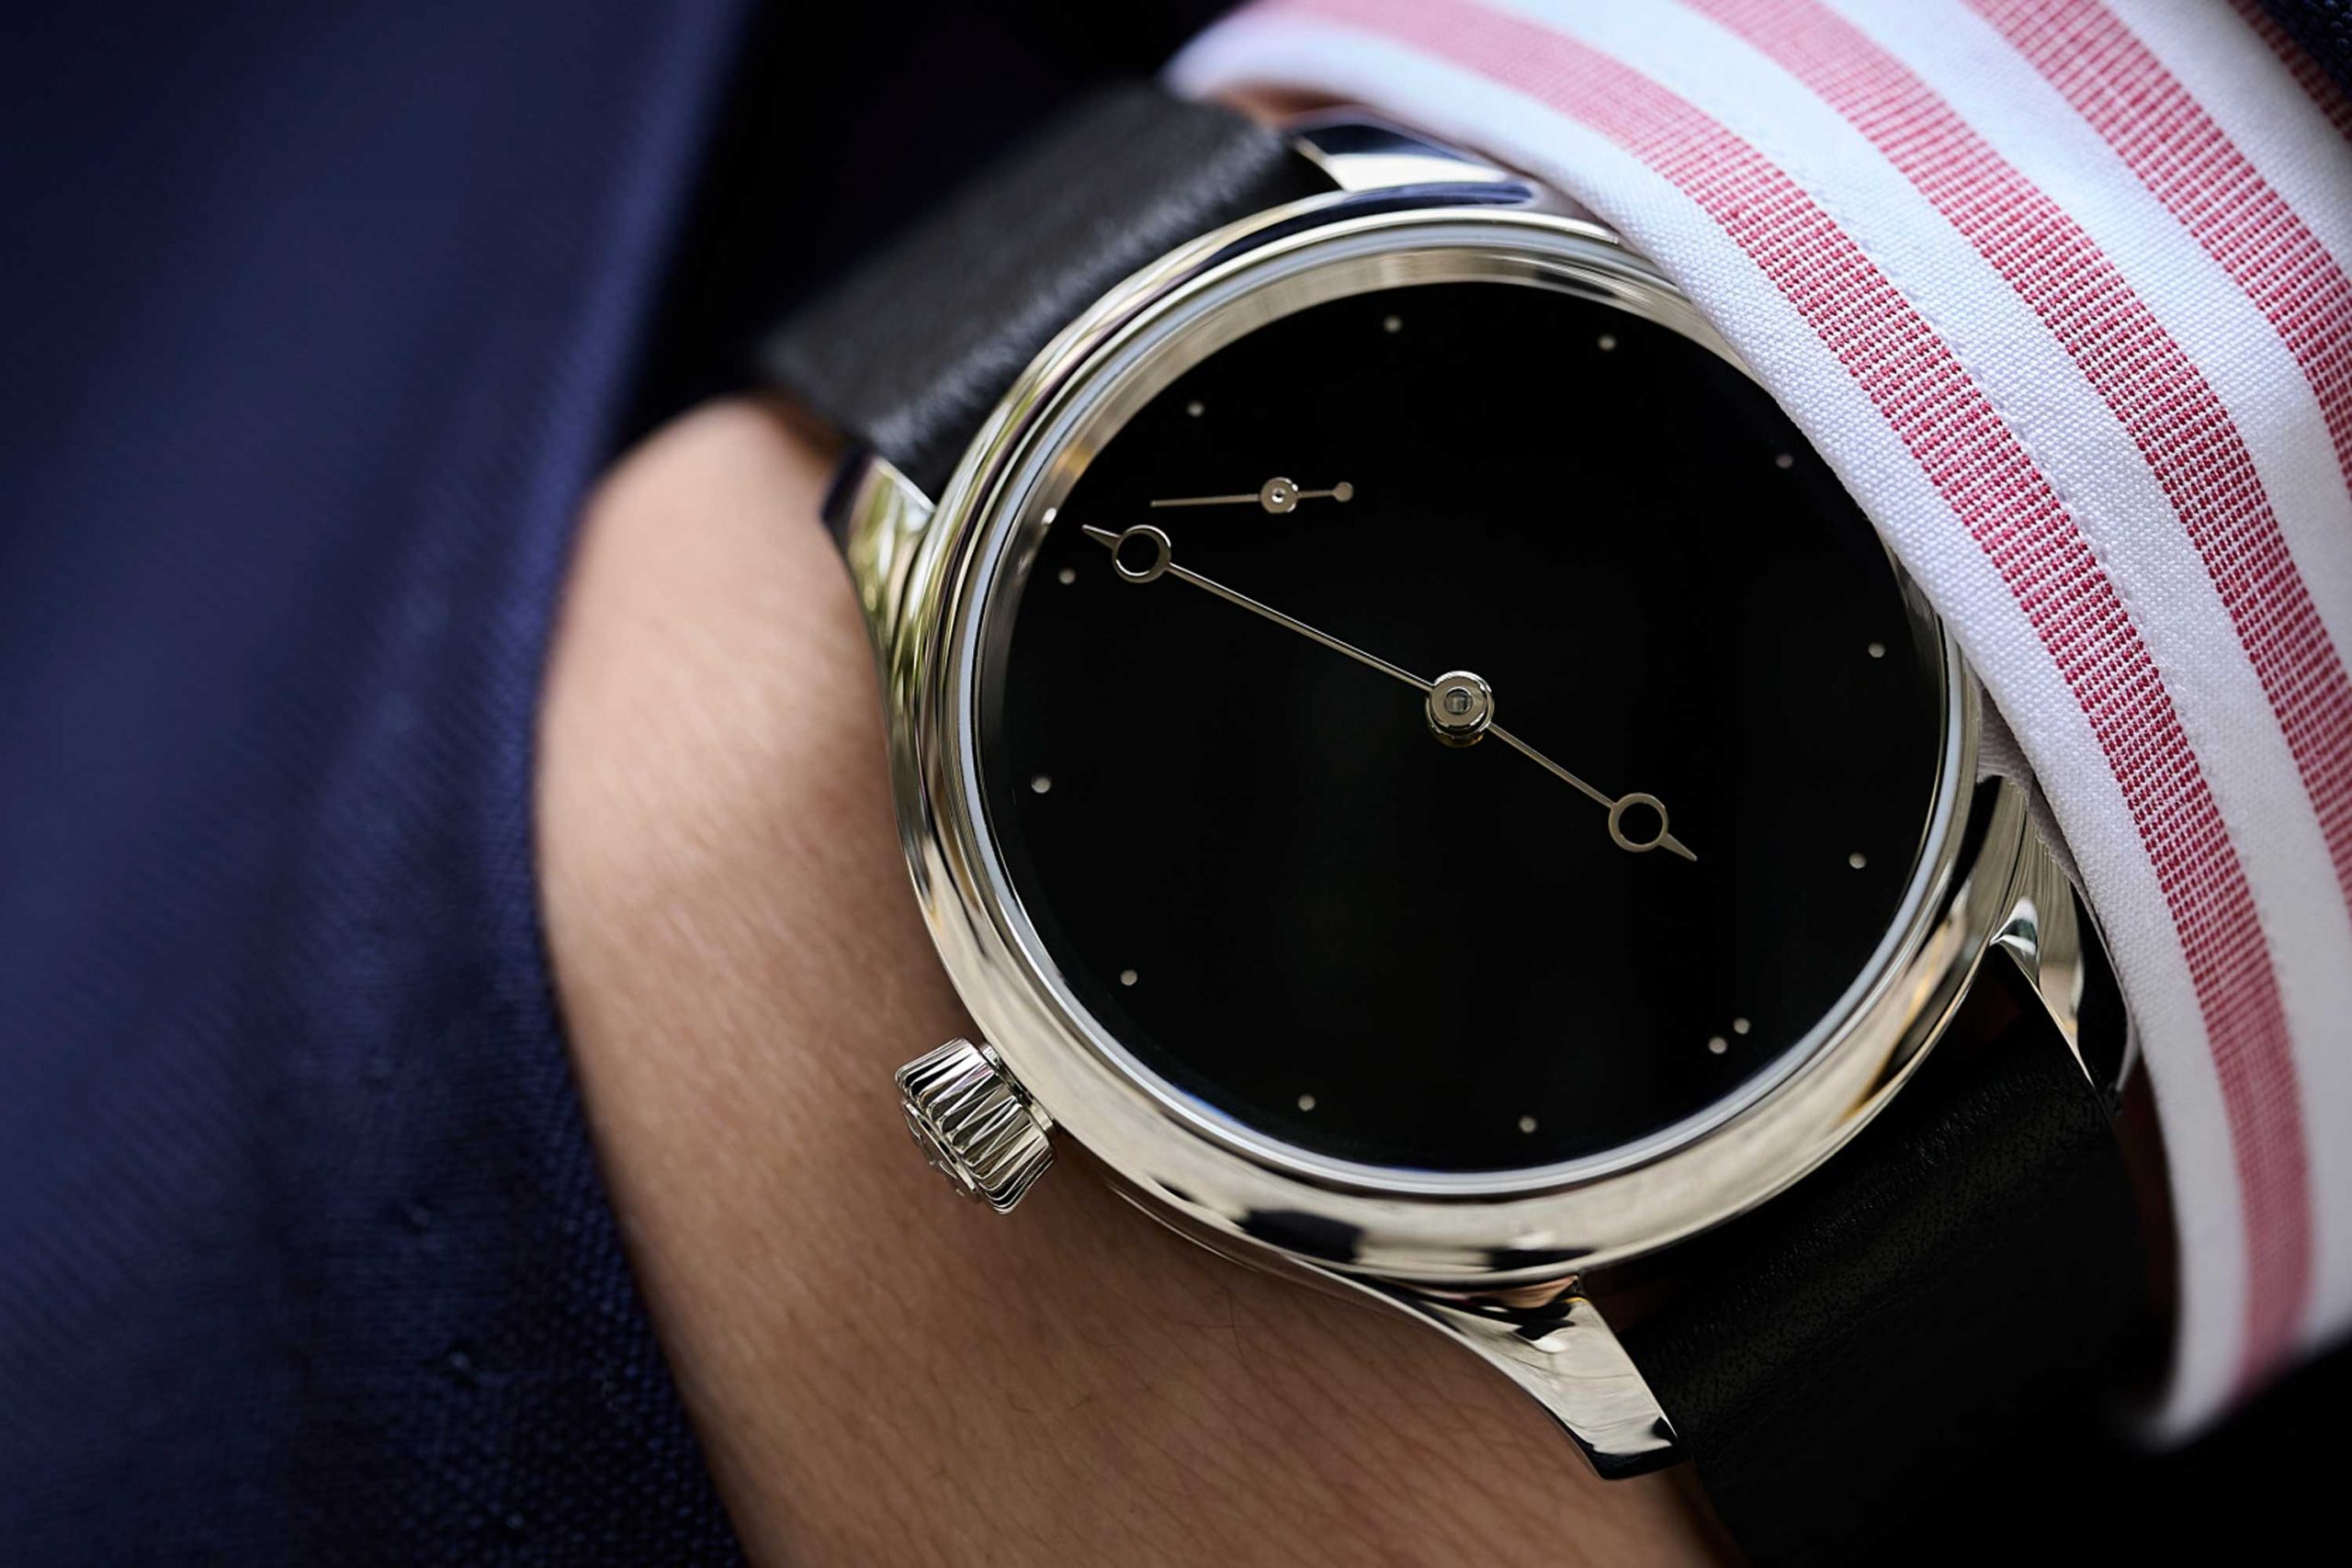 Introducing the H. Moser & Cie x The Armoury Endeavour Small Seconds Total Eclipse